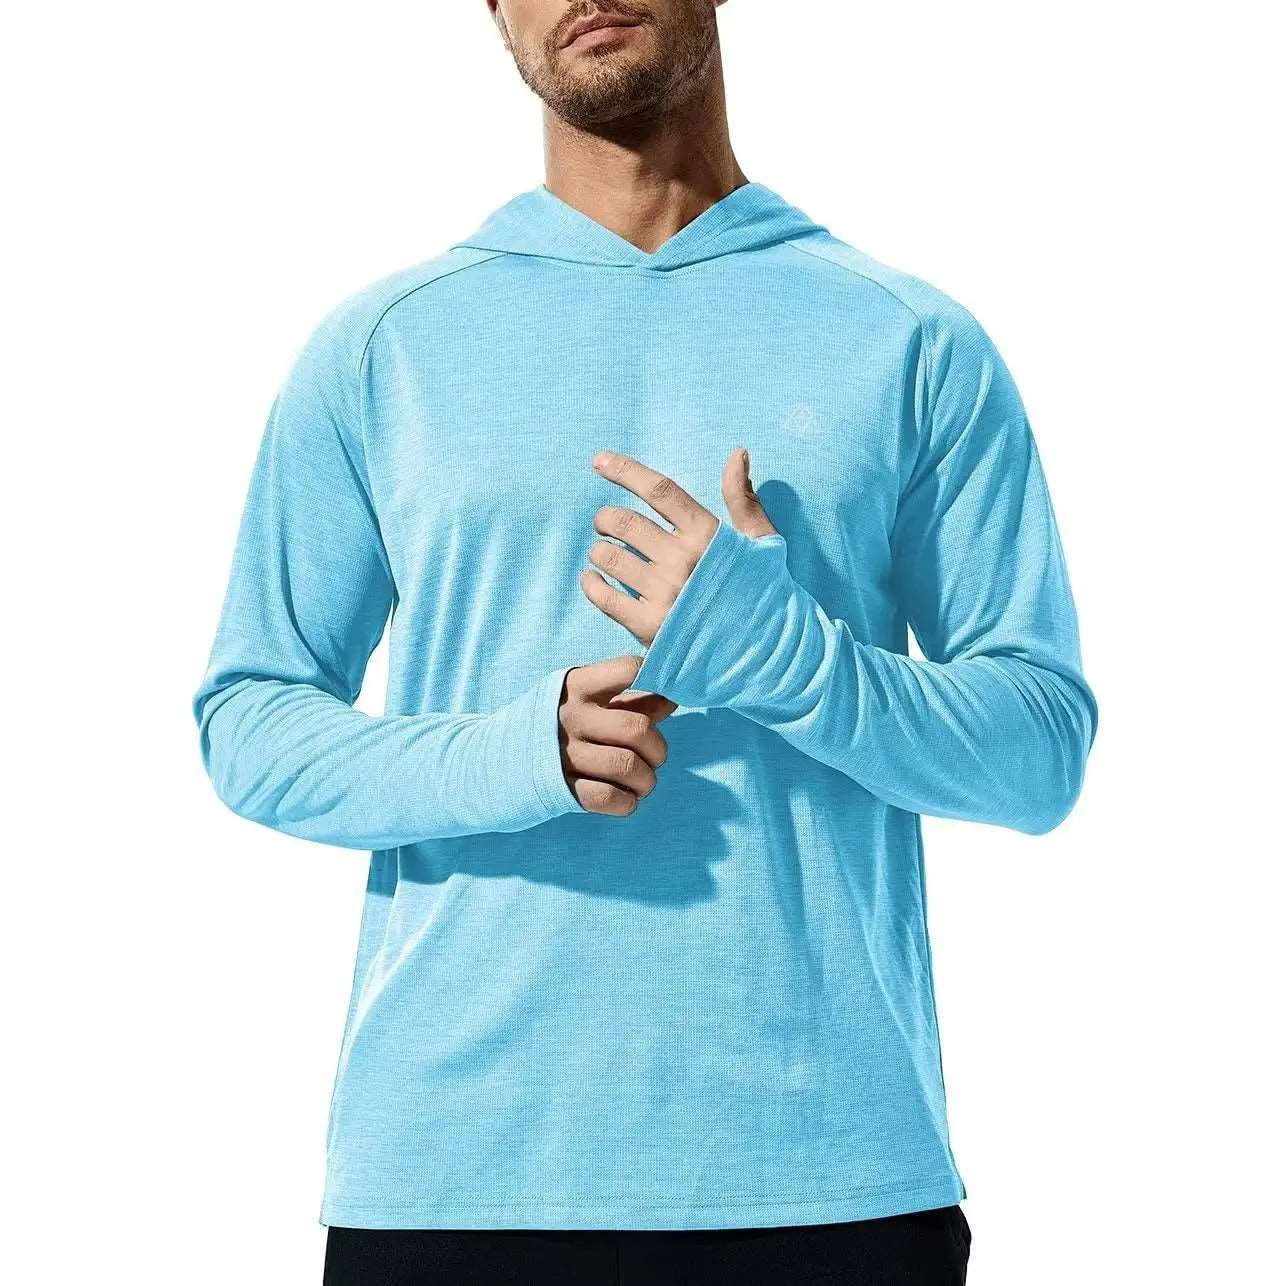 Haimont Men's UPF 50+ Sun Protection Hoodie Shirt with Thumbholes, Sky Blue / S